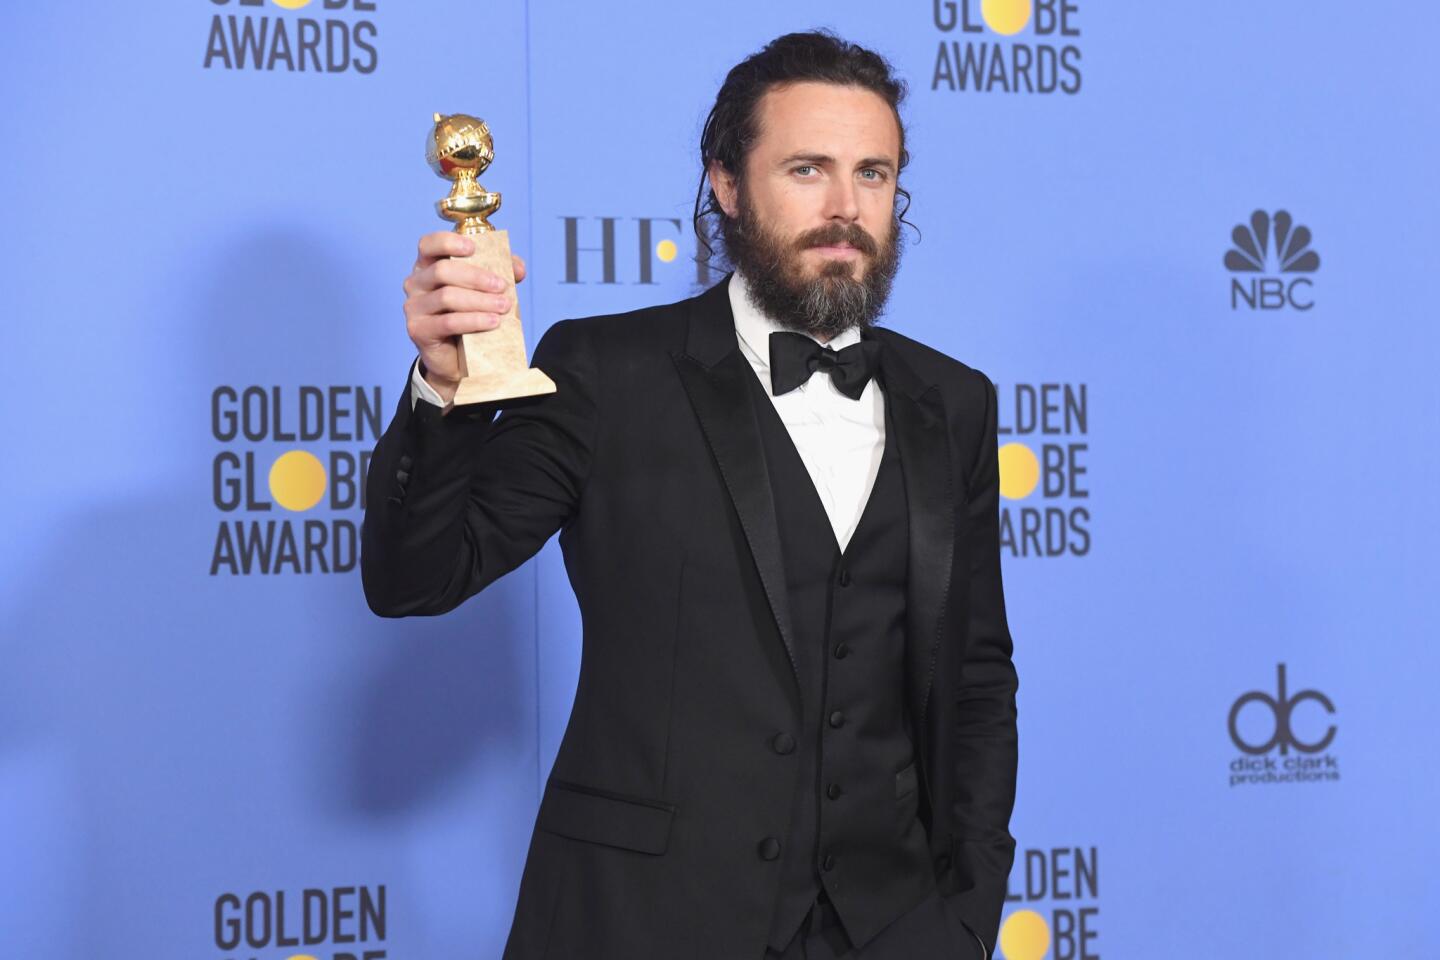 Casey Affleck with his award for actor in a motion picture drama for "Manchester by the Sea."